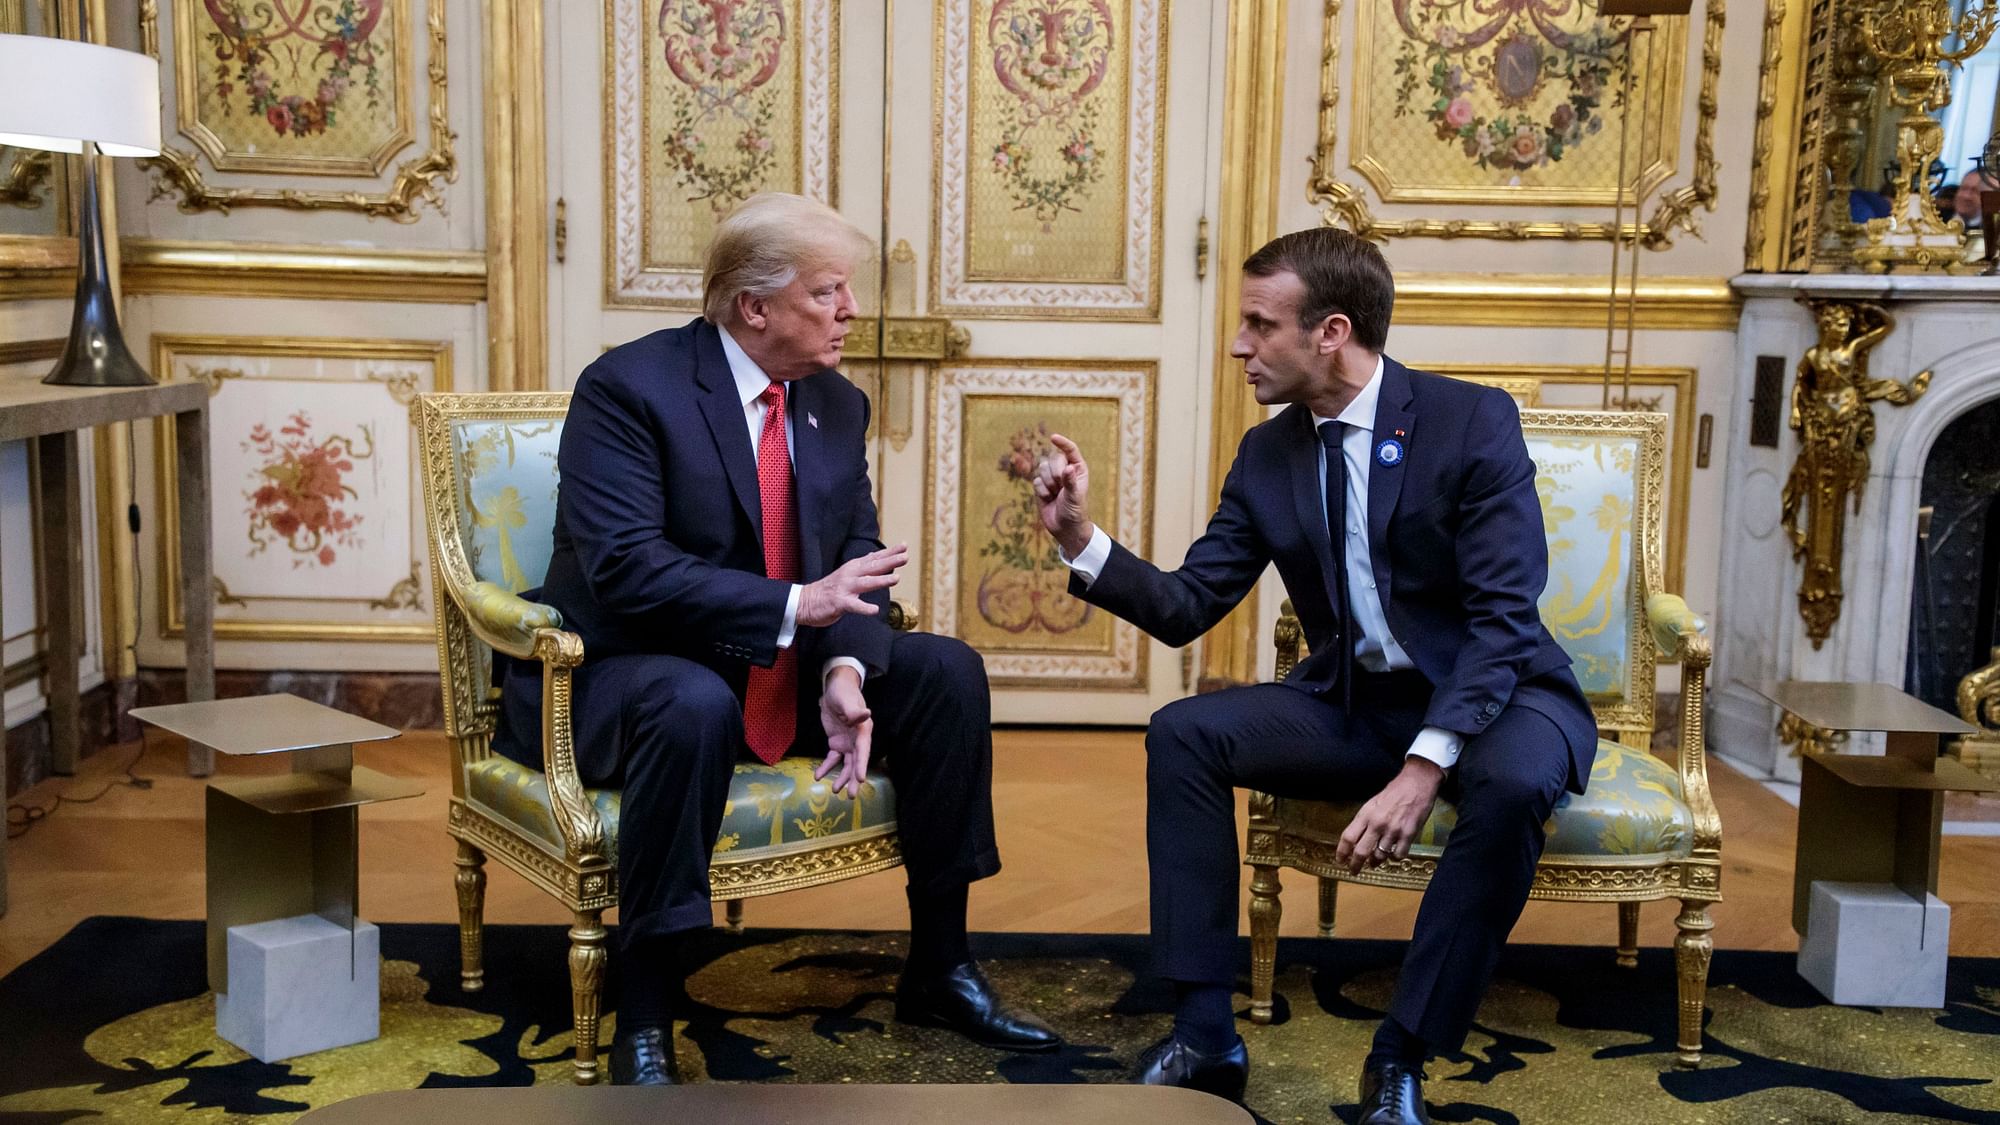 Trump has criticised a suggestion by the French President for a joint European army as “very insulting”. &nbsp;